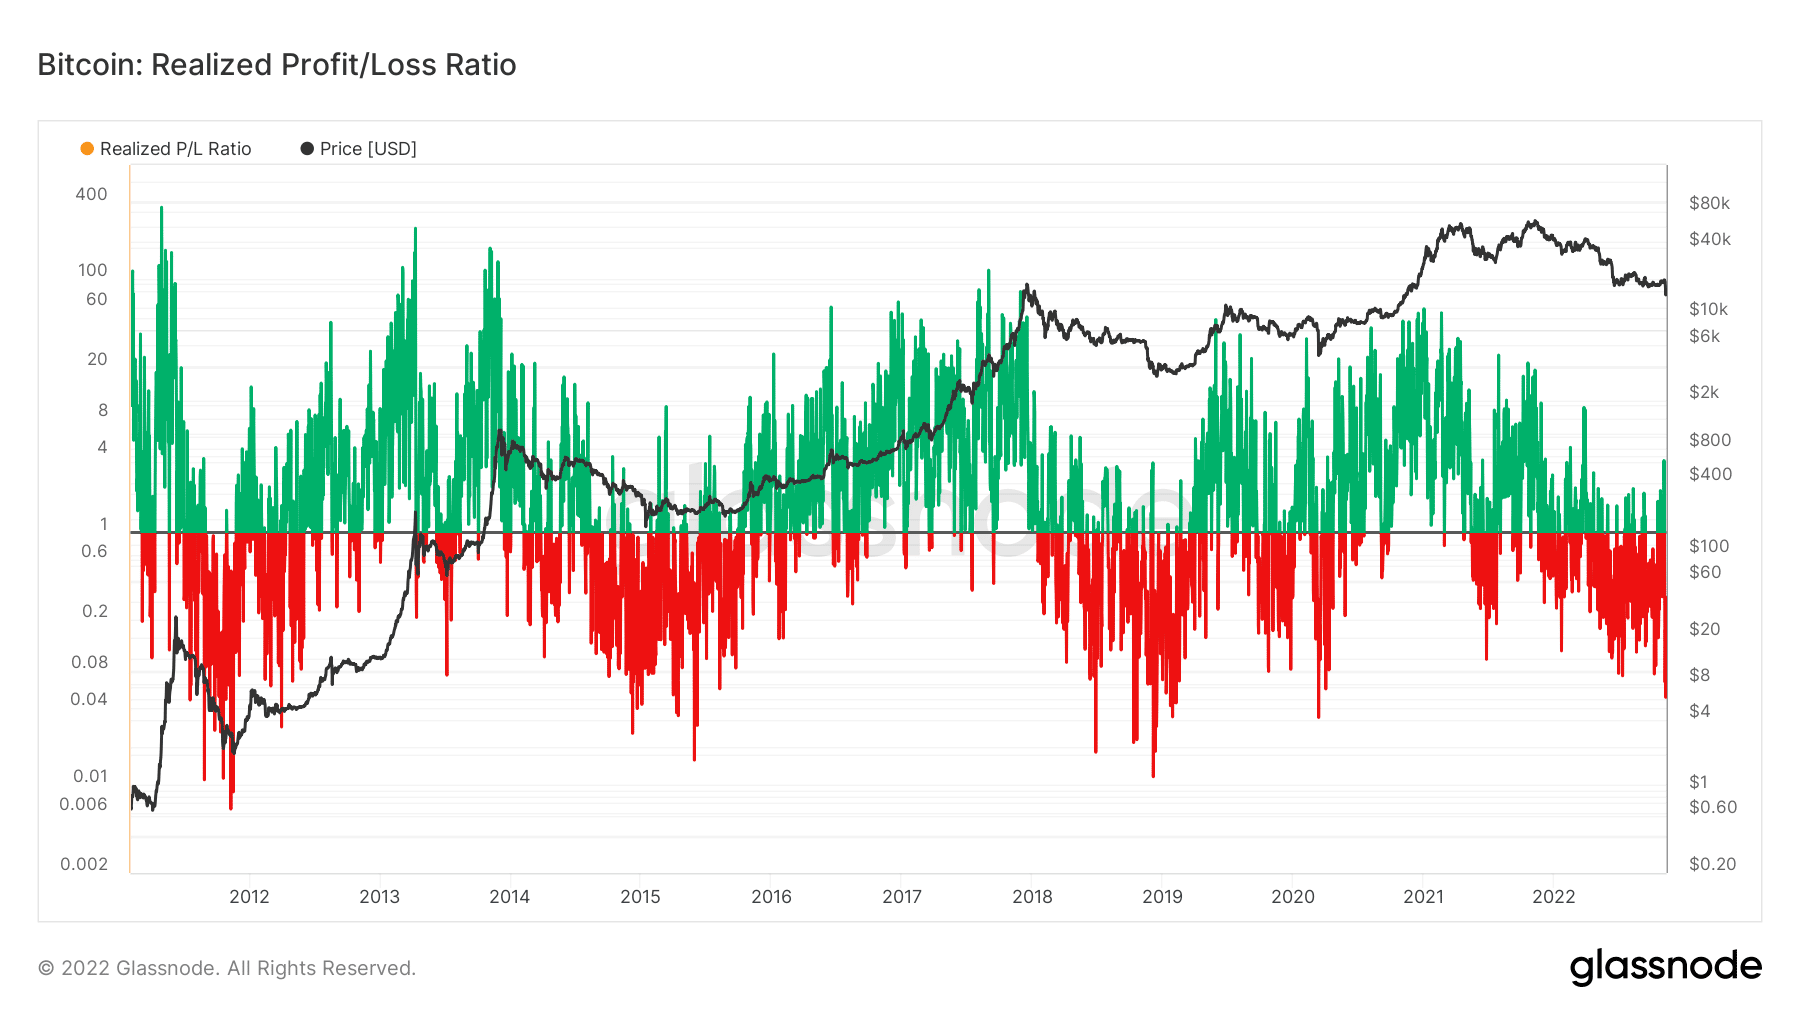 Bitcoin profit and loss ratio in 2022